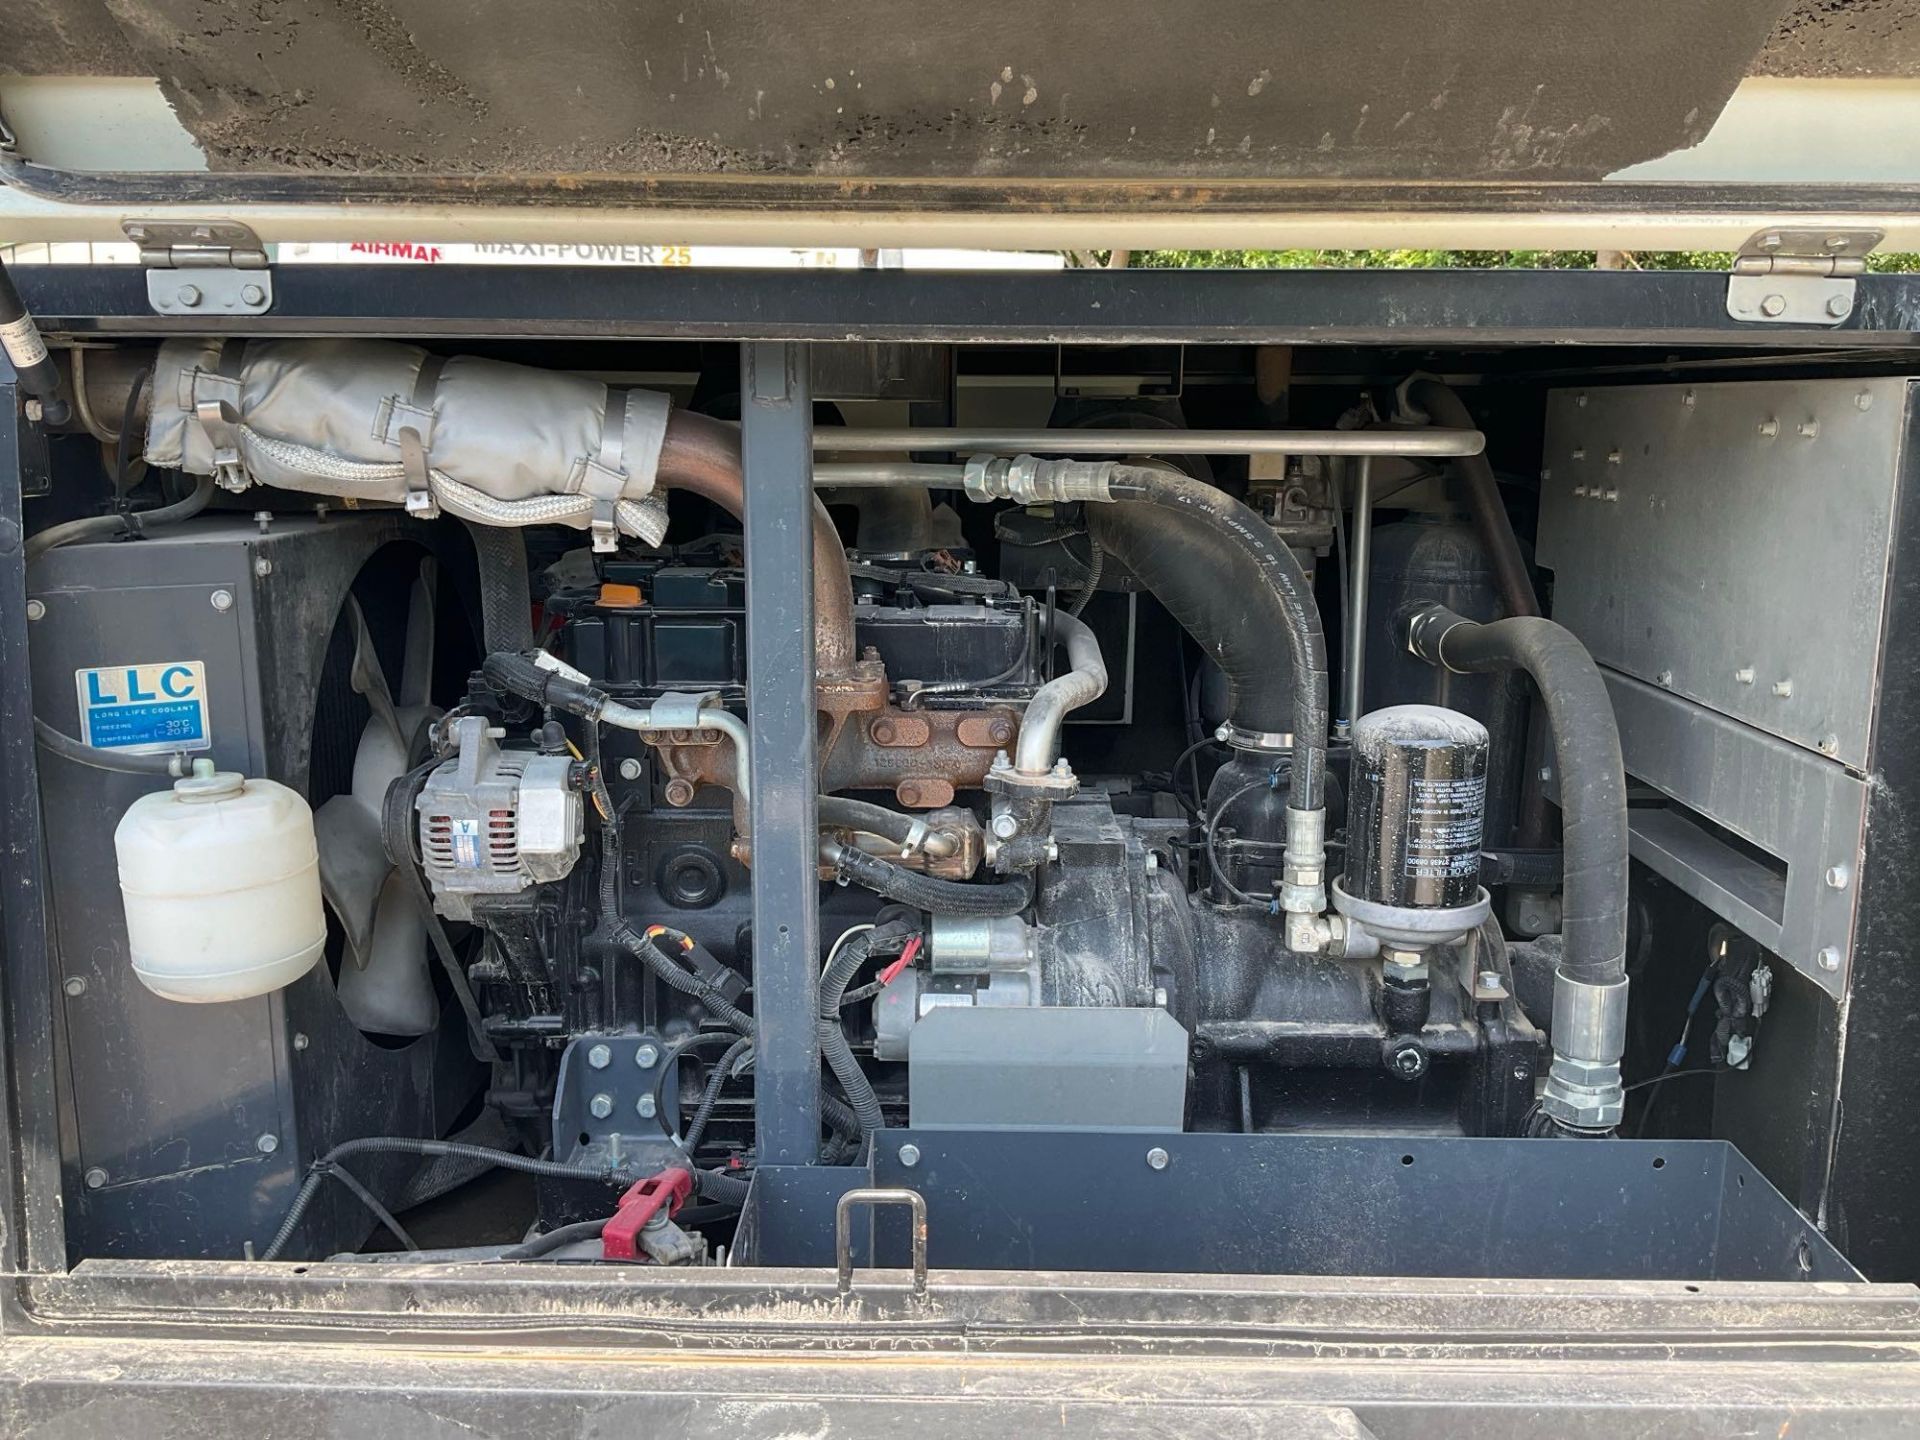 2018/2019 ALLMAND MAXI-POWER MA185-6E1 COMPRESSOR, DIESEL, TRAILER MOUNTED, NORMAL OPERATING - Image 3 of 14